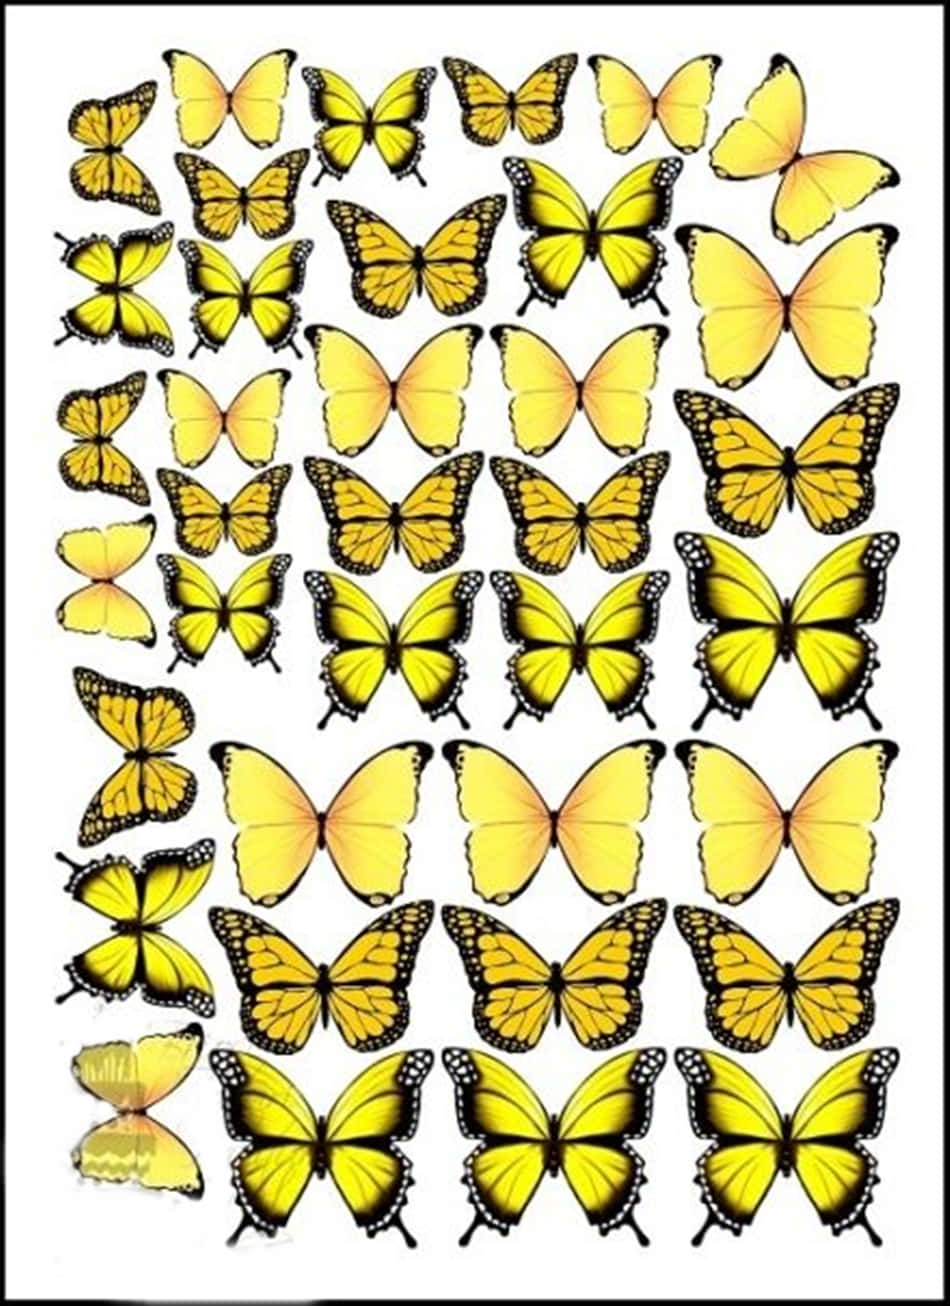 Take Flight With These Adorable Yellow Butterflies Wallpaper